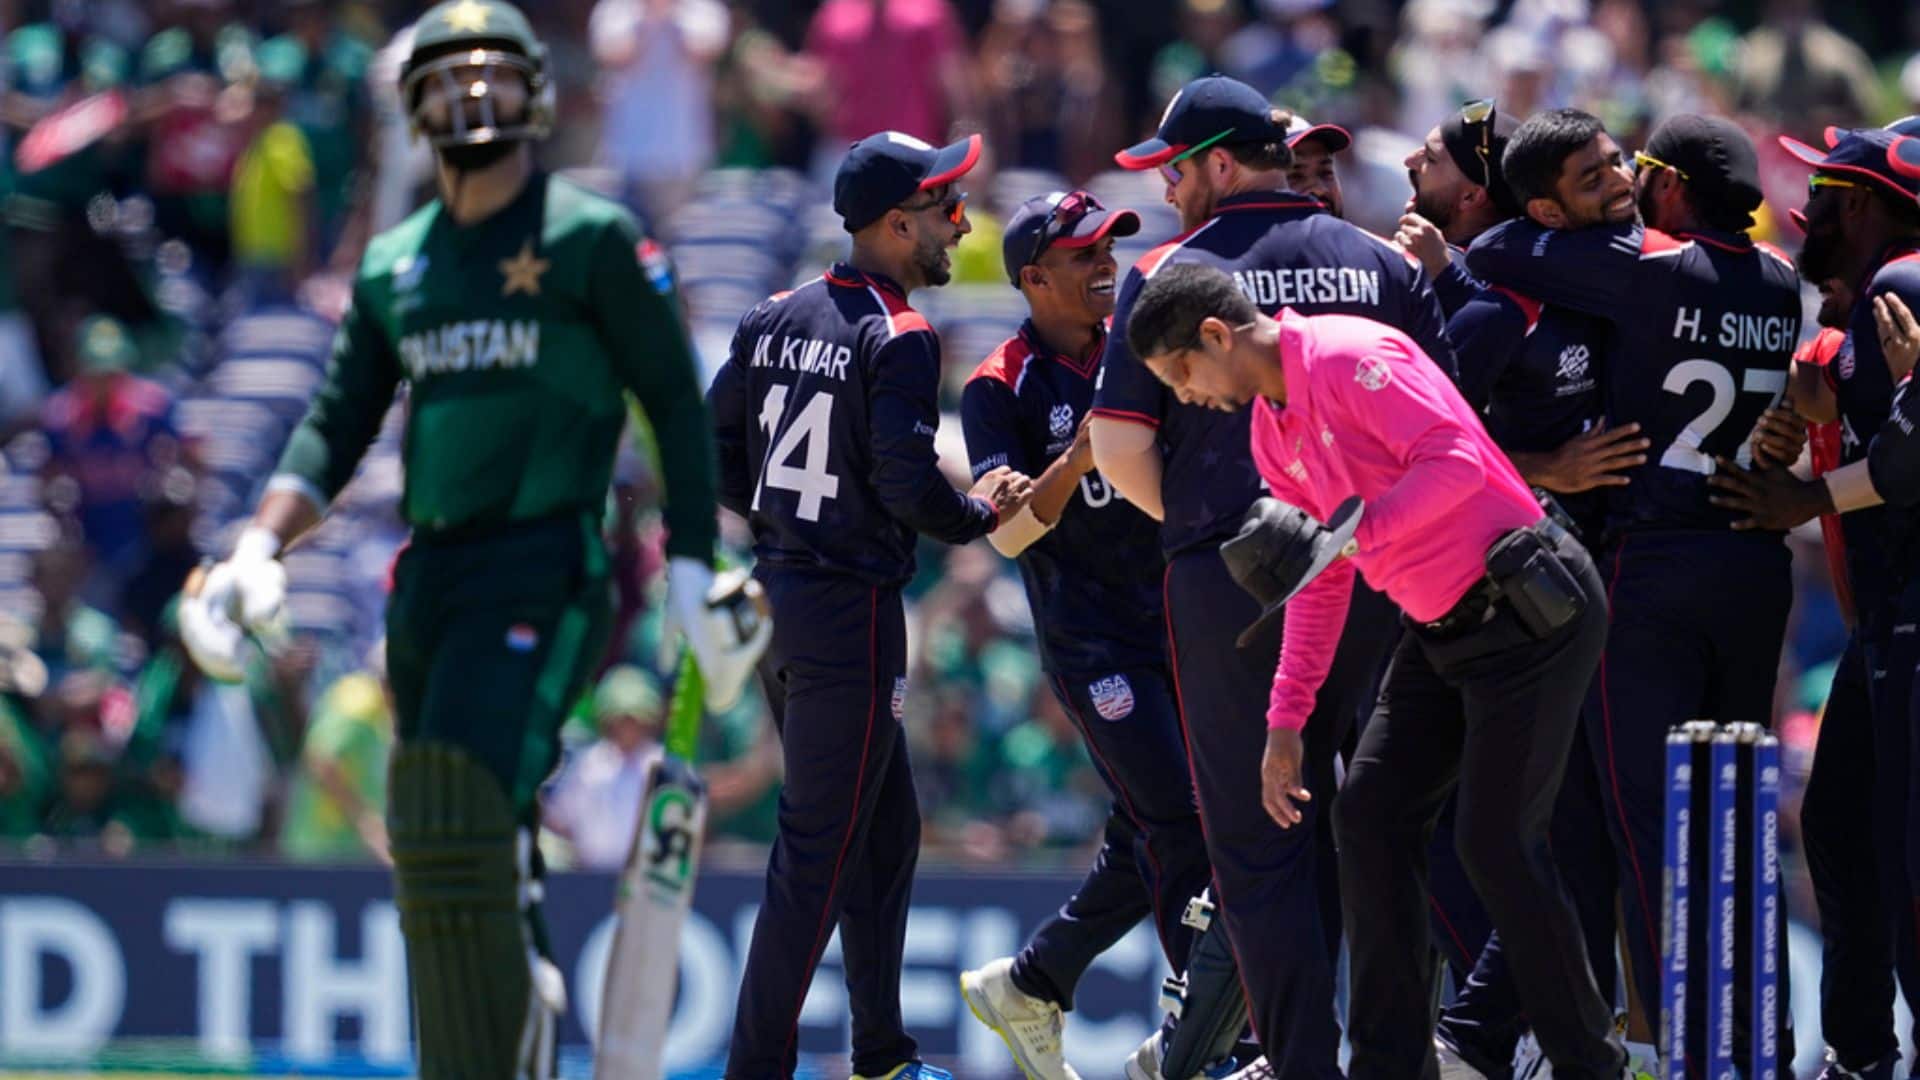 Pakistan lost to USA in their last game [AP]